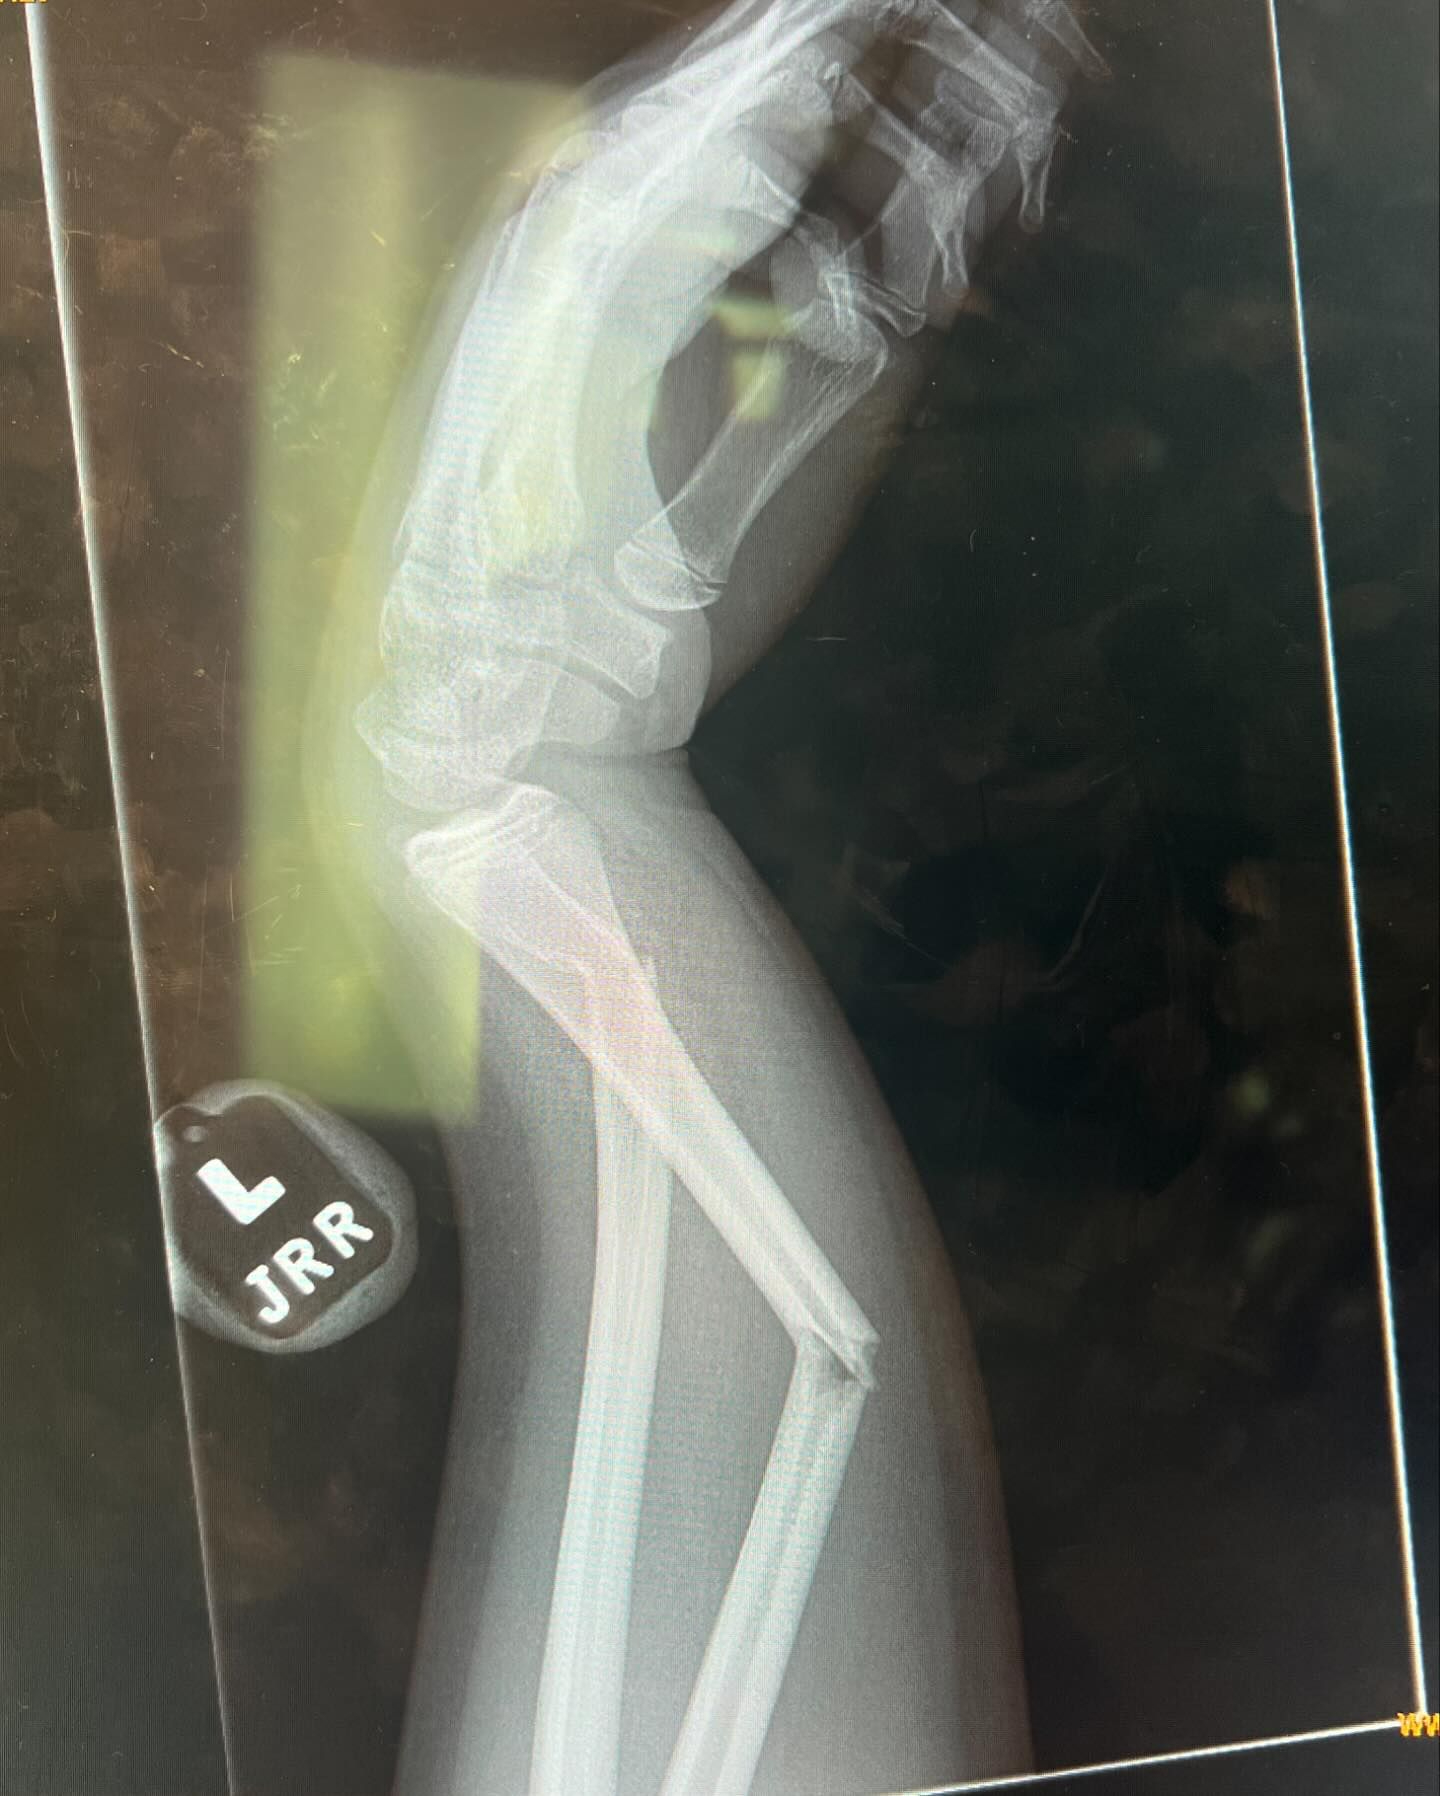 On the sixth slide, the Lemme founder shared an X-ray of a broken arm